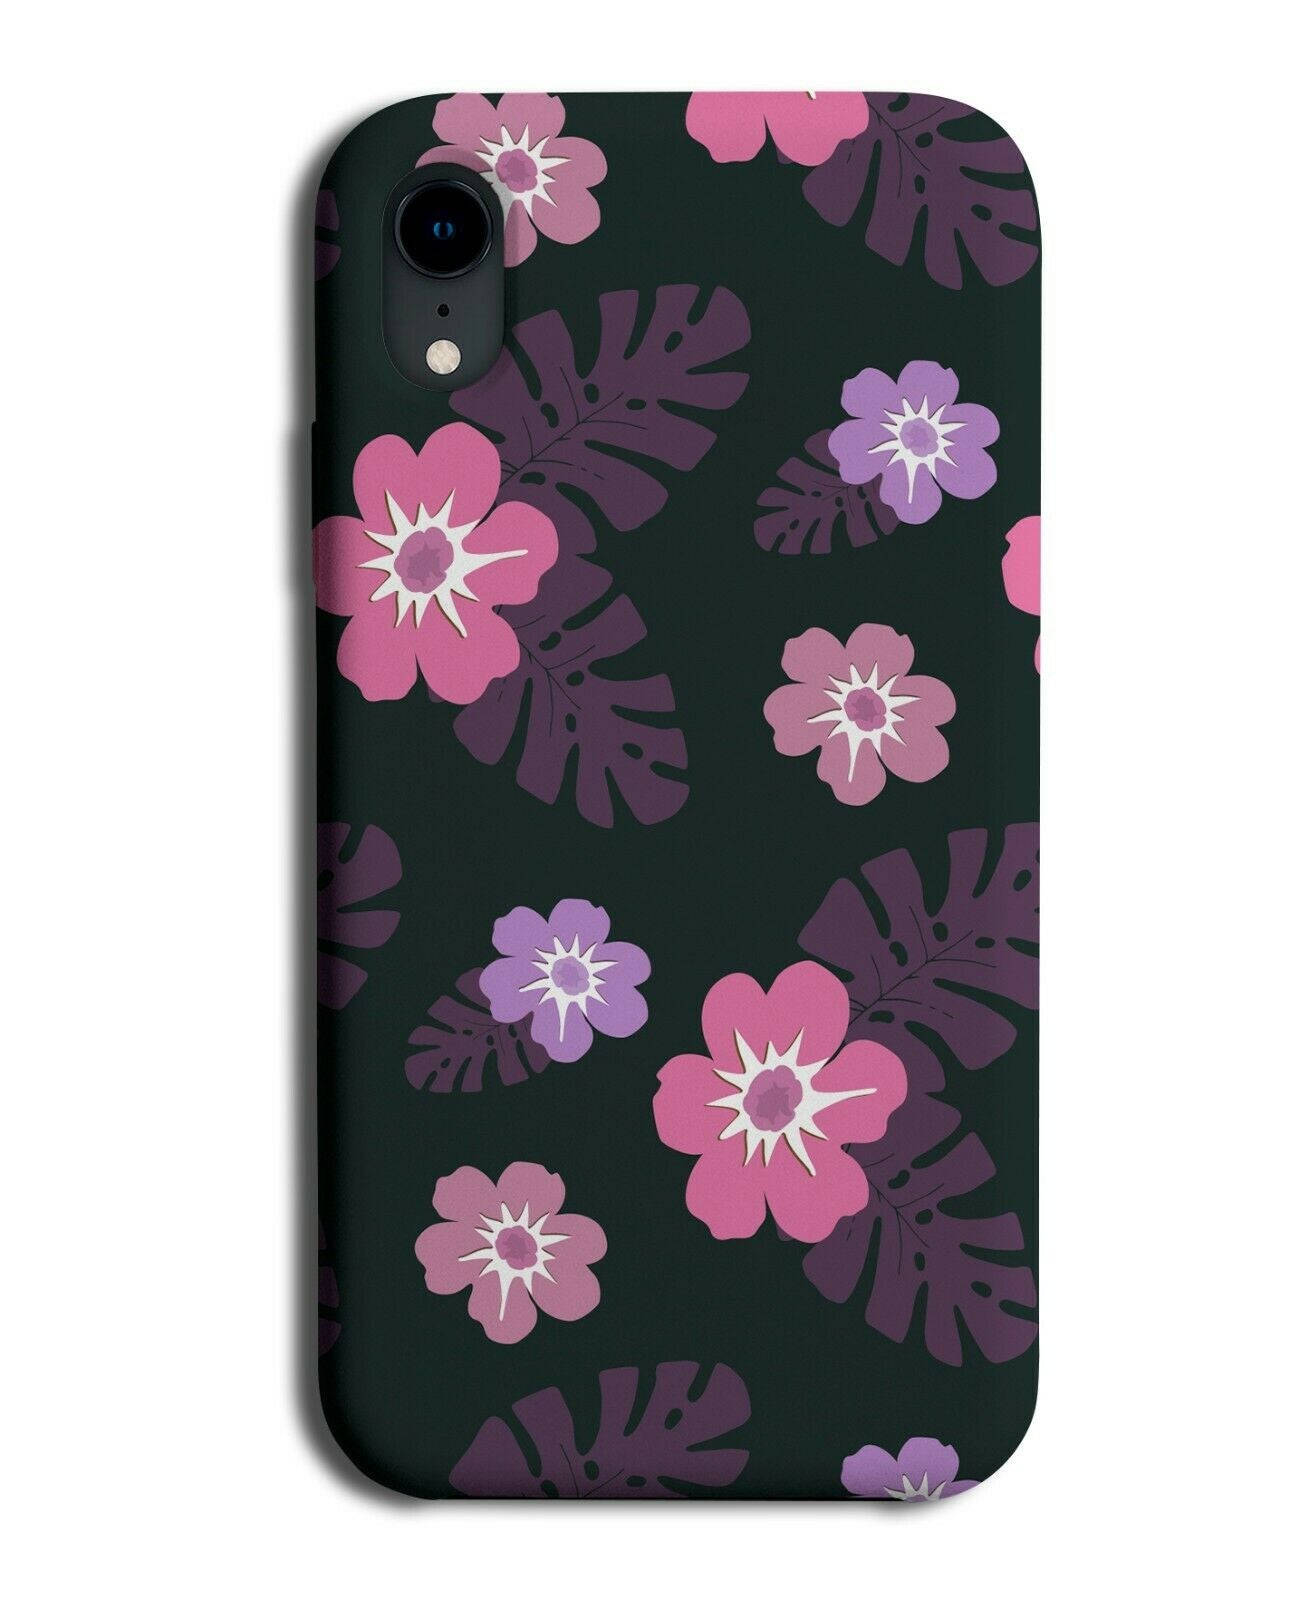 A Phone Case With Purple Flowers On Black Wallpaper